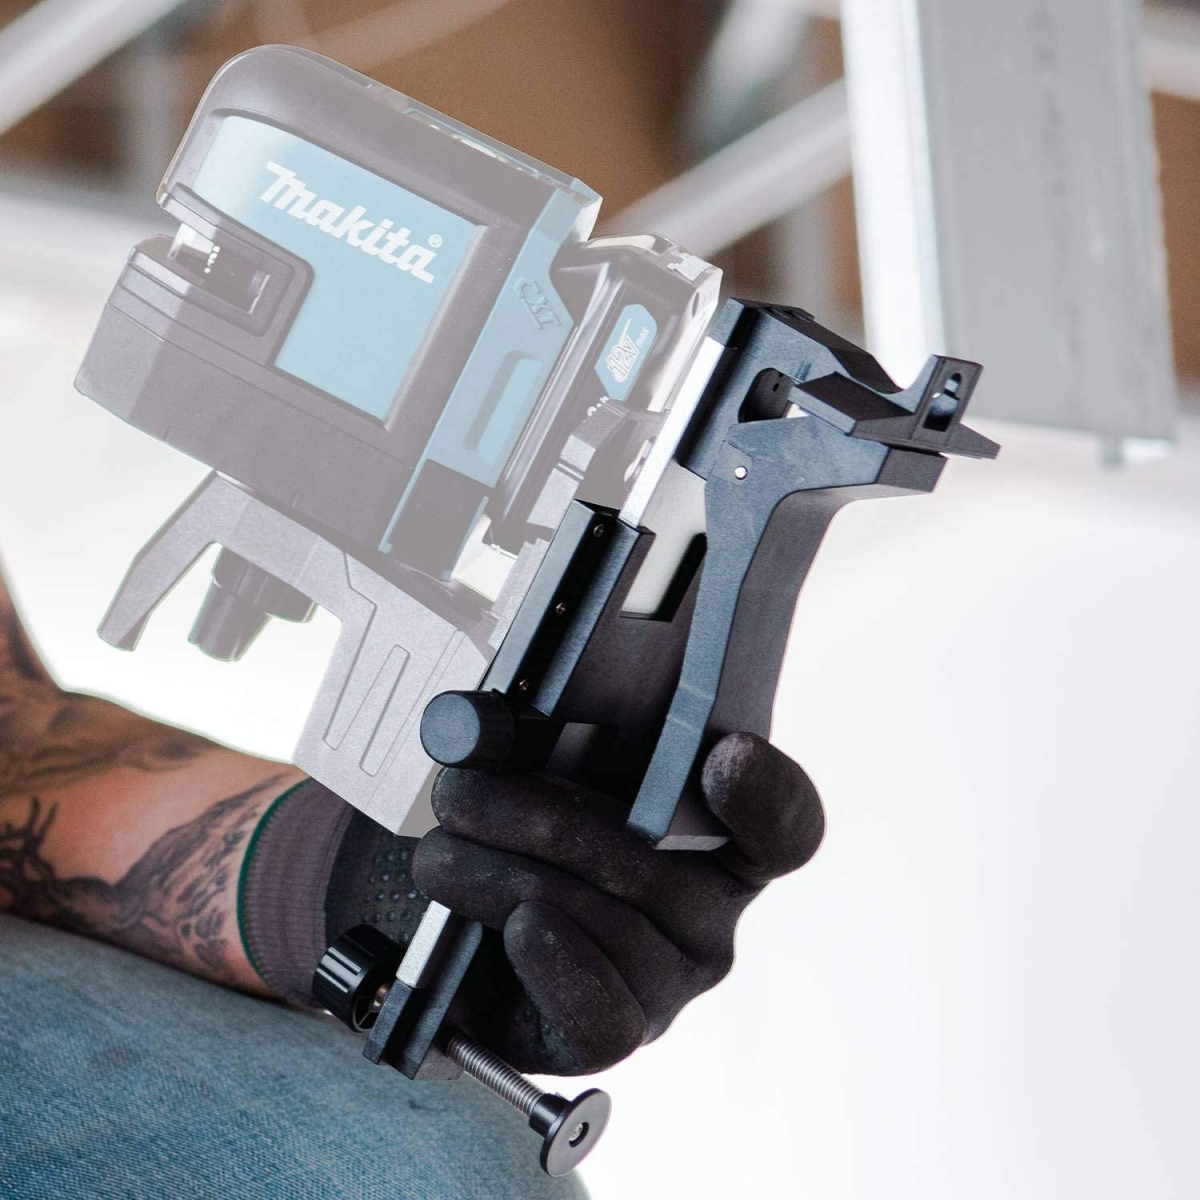 https://www.toomanytools.com/28605-thickbox_default/-makita-support-mural-pour-laser-le00870137.jpg